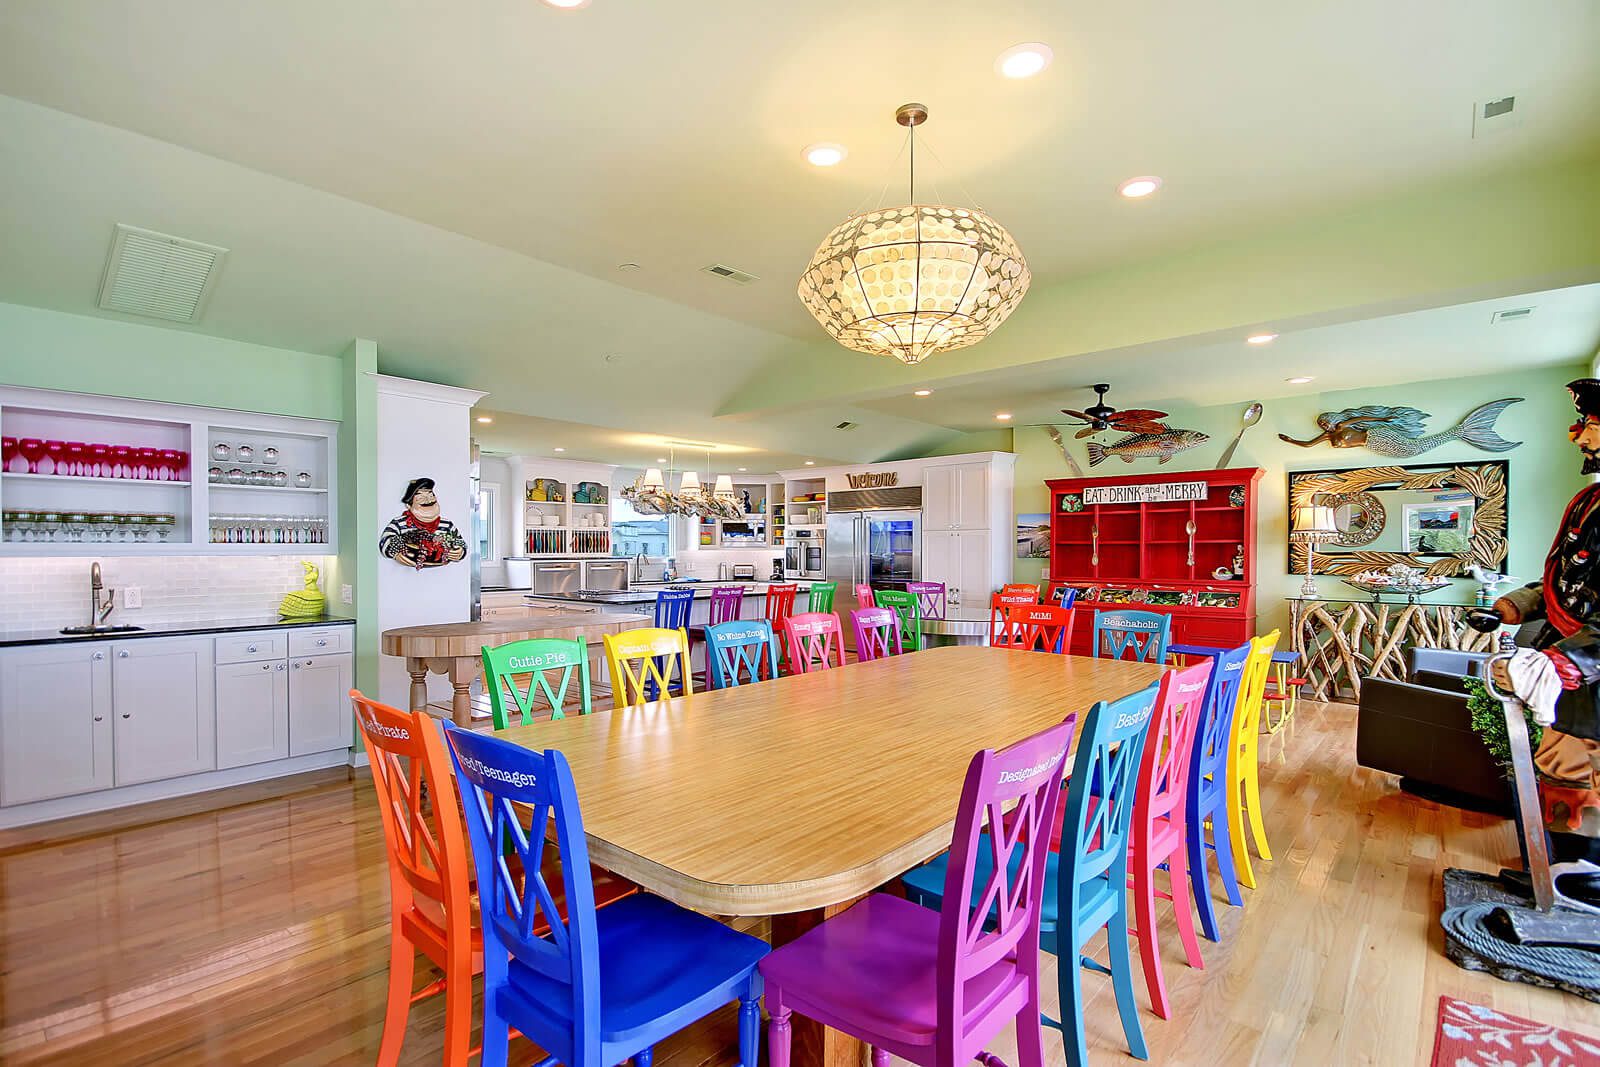 Casa Flamingo Dining Room with Kitchen View - Isle of Palms, SC